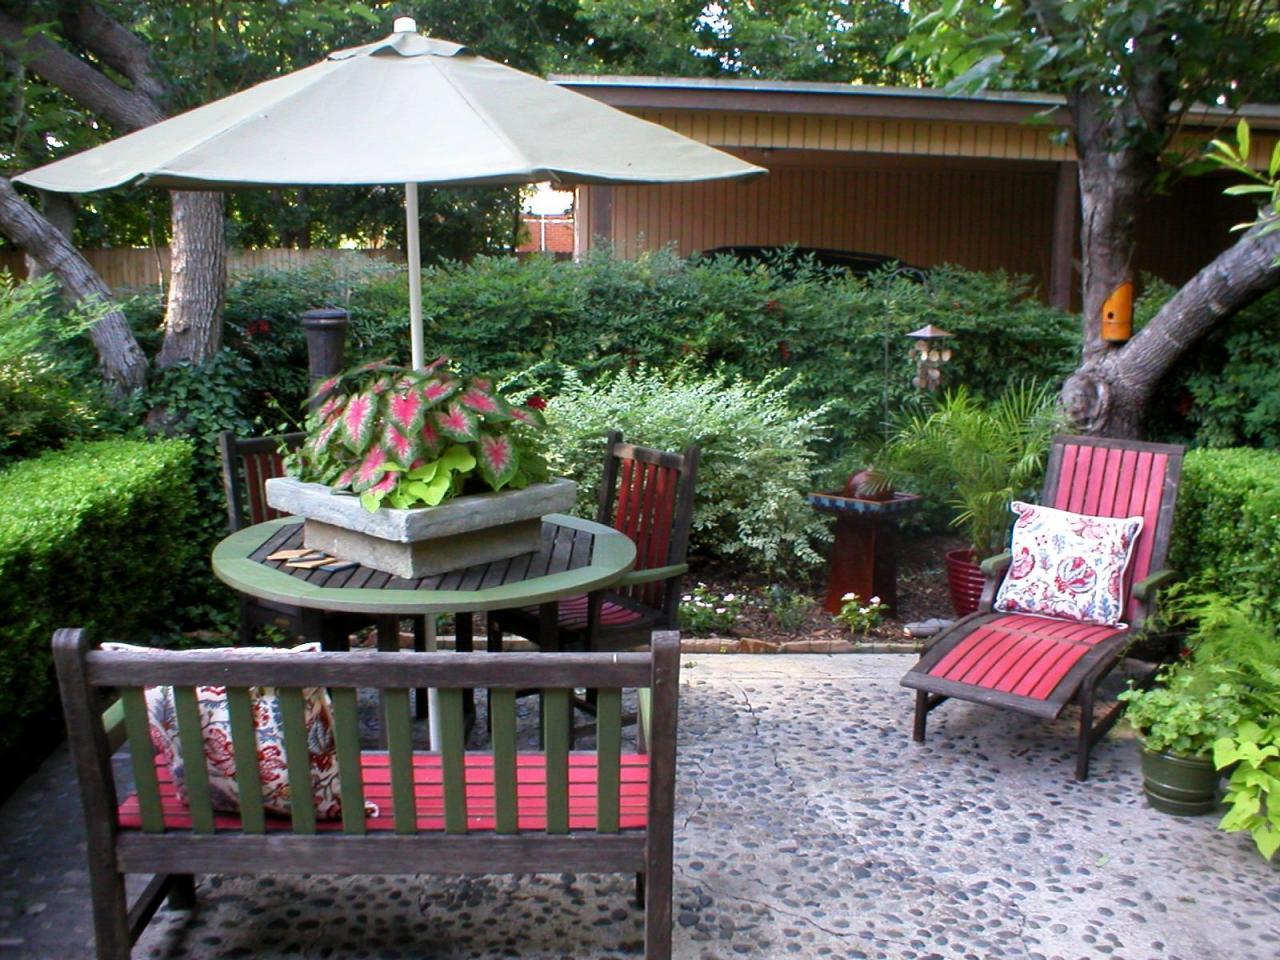 Add Inexpensive Touches to Dress Up Outdoor Spaces